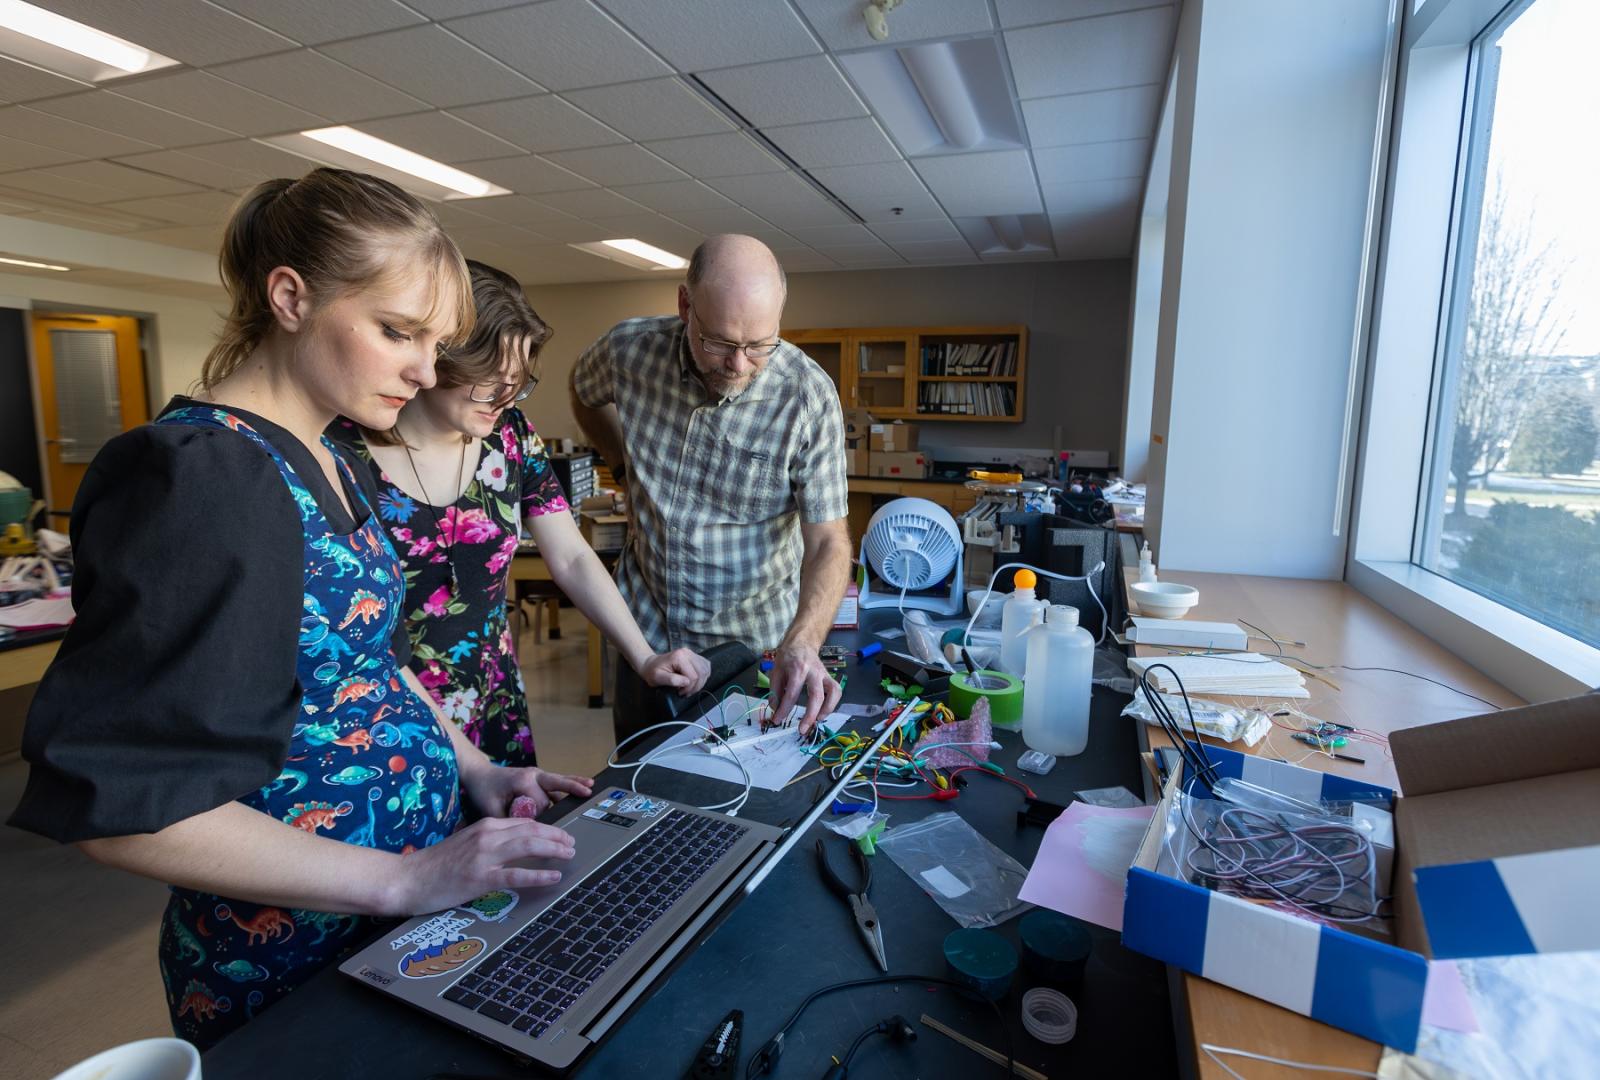 Geosciences professor Jeff Clark works with students Sydney Closson and Kat McClain in building spectrometers.